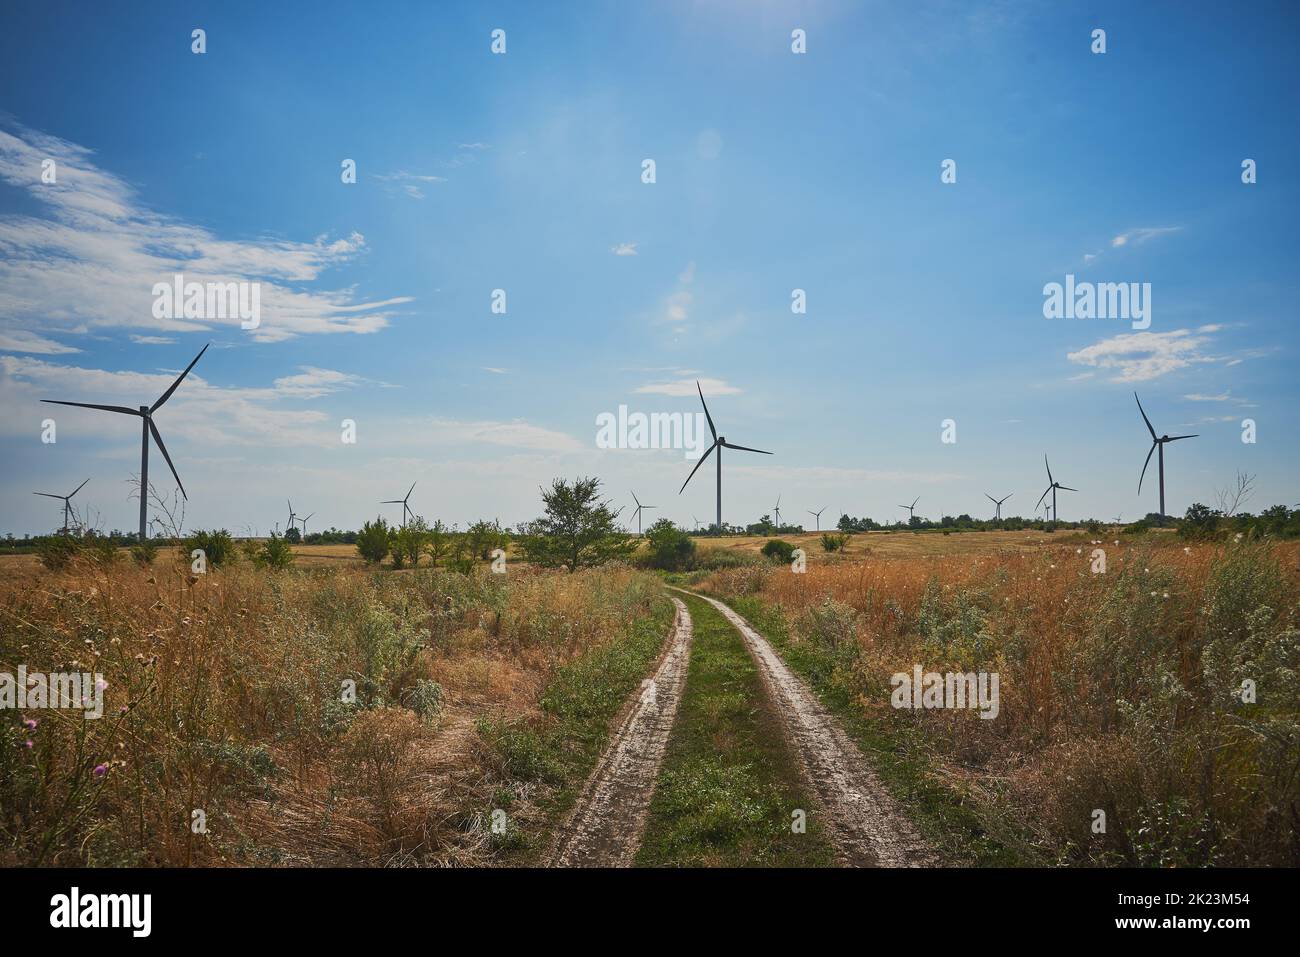 Dirt road in fields where there are wind turbines. Stock Photo